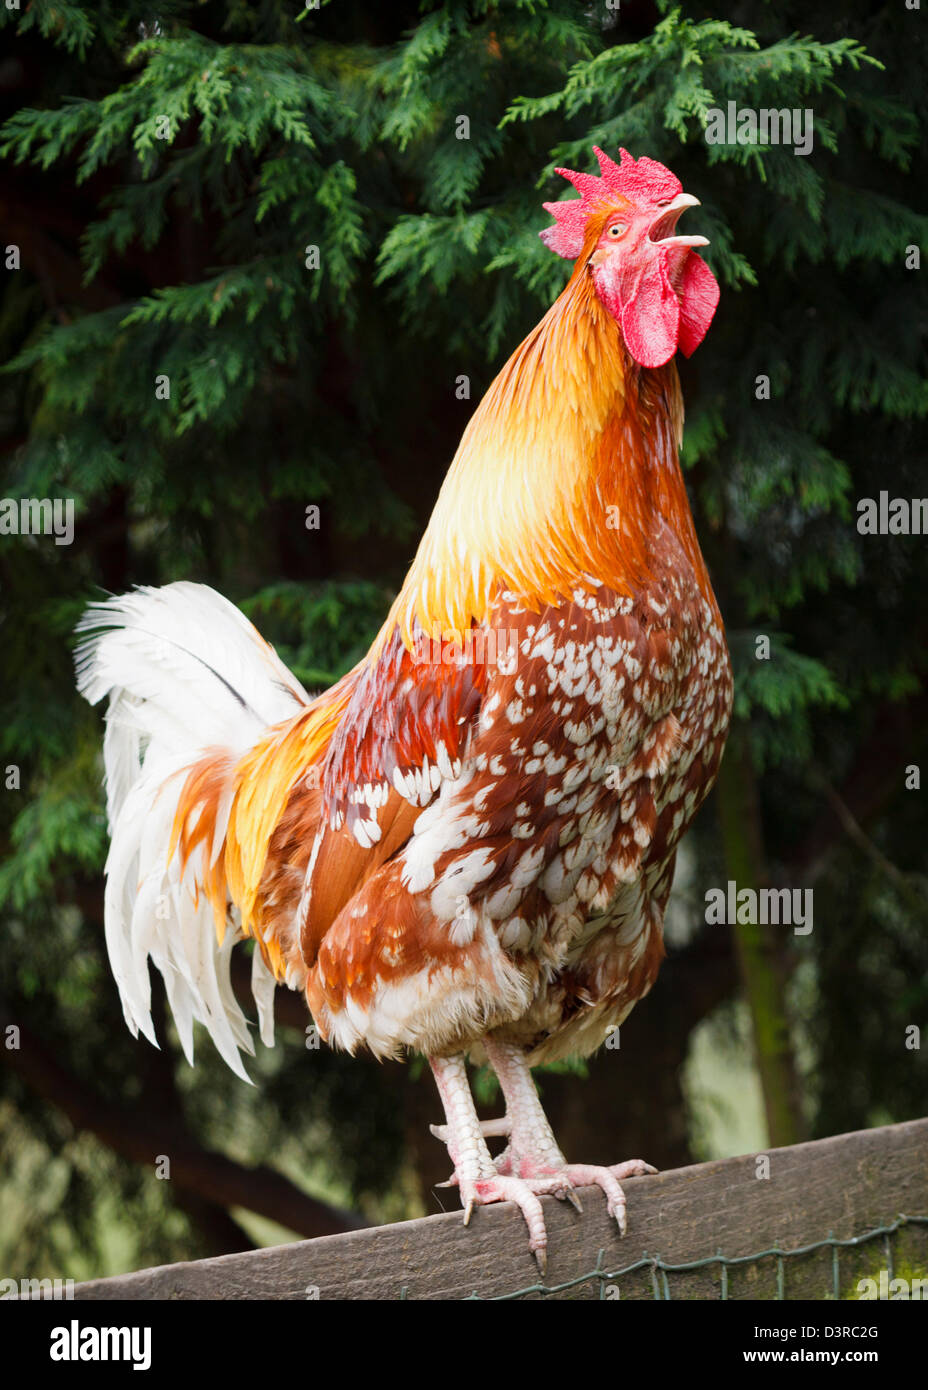 Wake Up Call - The Cockerel Crowing Stock Photo